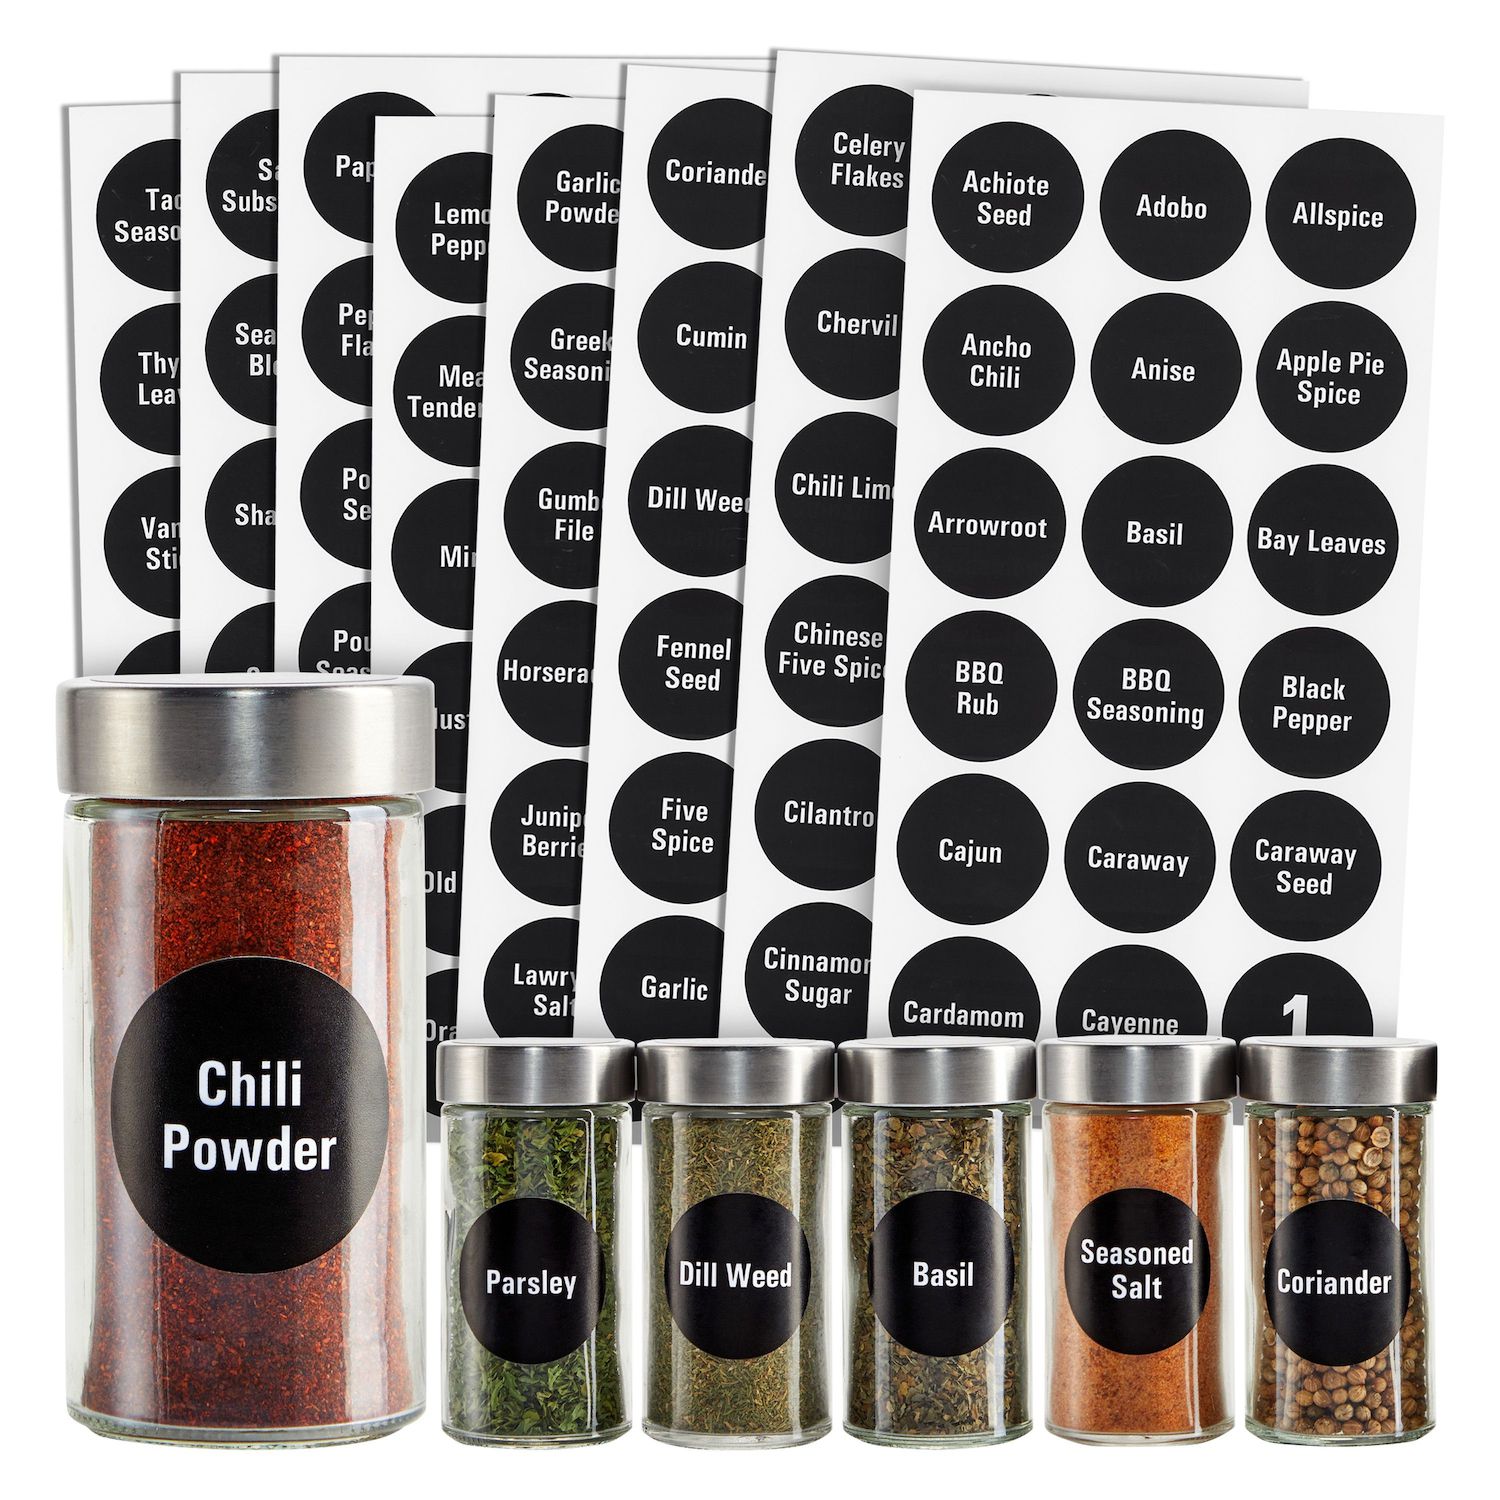 Talented Kitchen 184 Spice Labels Stickers, Preprinted White Spice